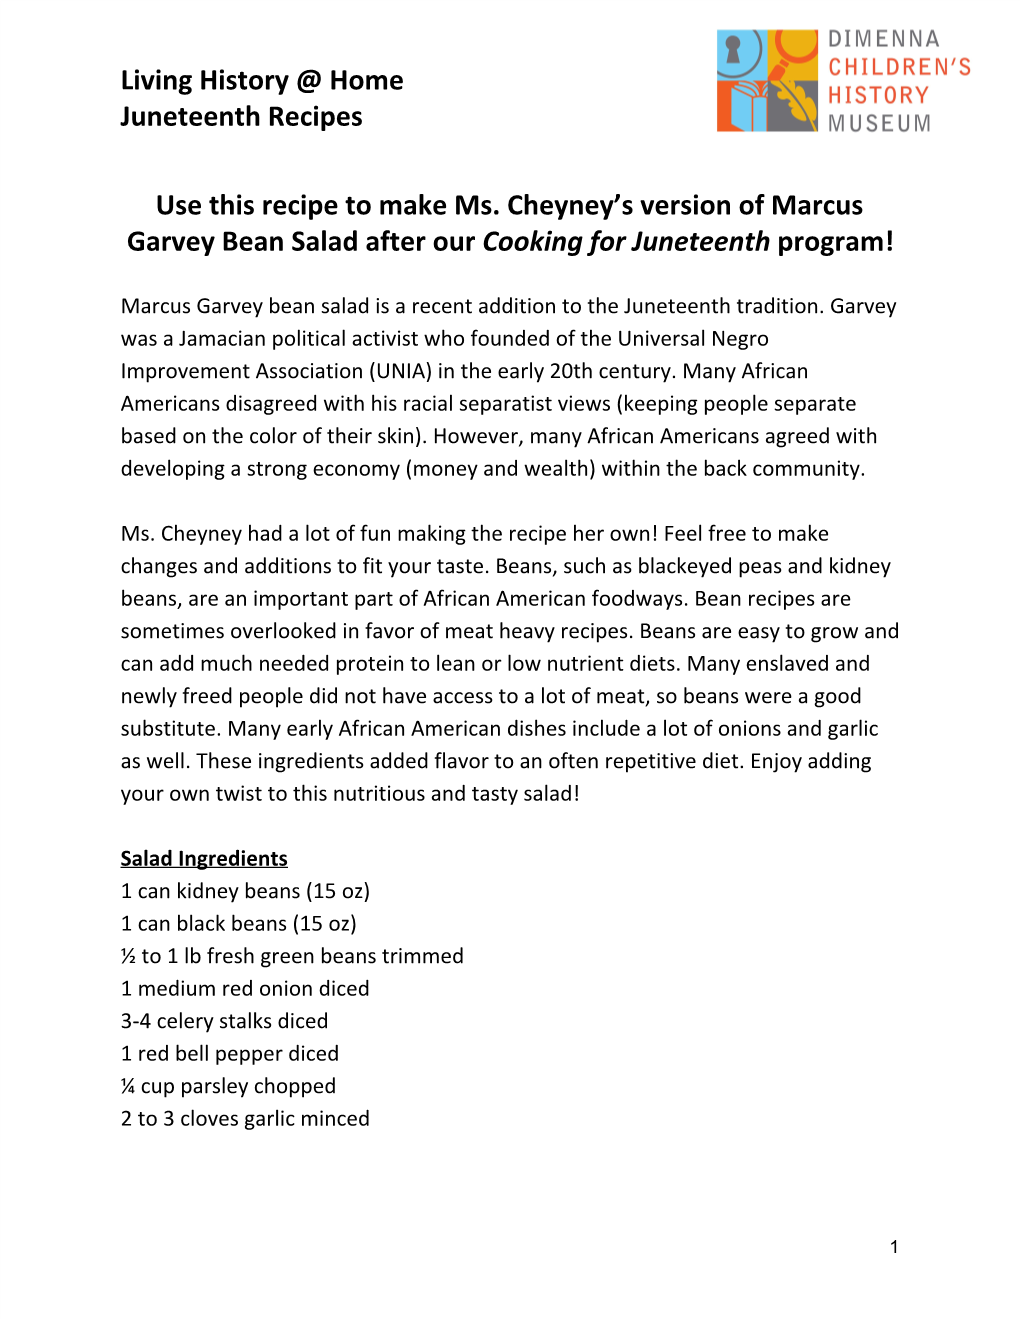 Living History @ Home Juneteenth Recipes Use This Recipe to Make Ms. Cheyney's Version of Marcus Garvey Bean Salad​ ​Aft